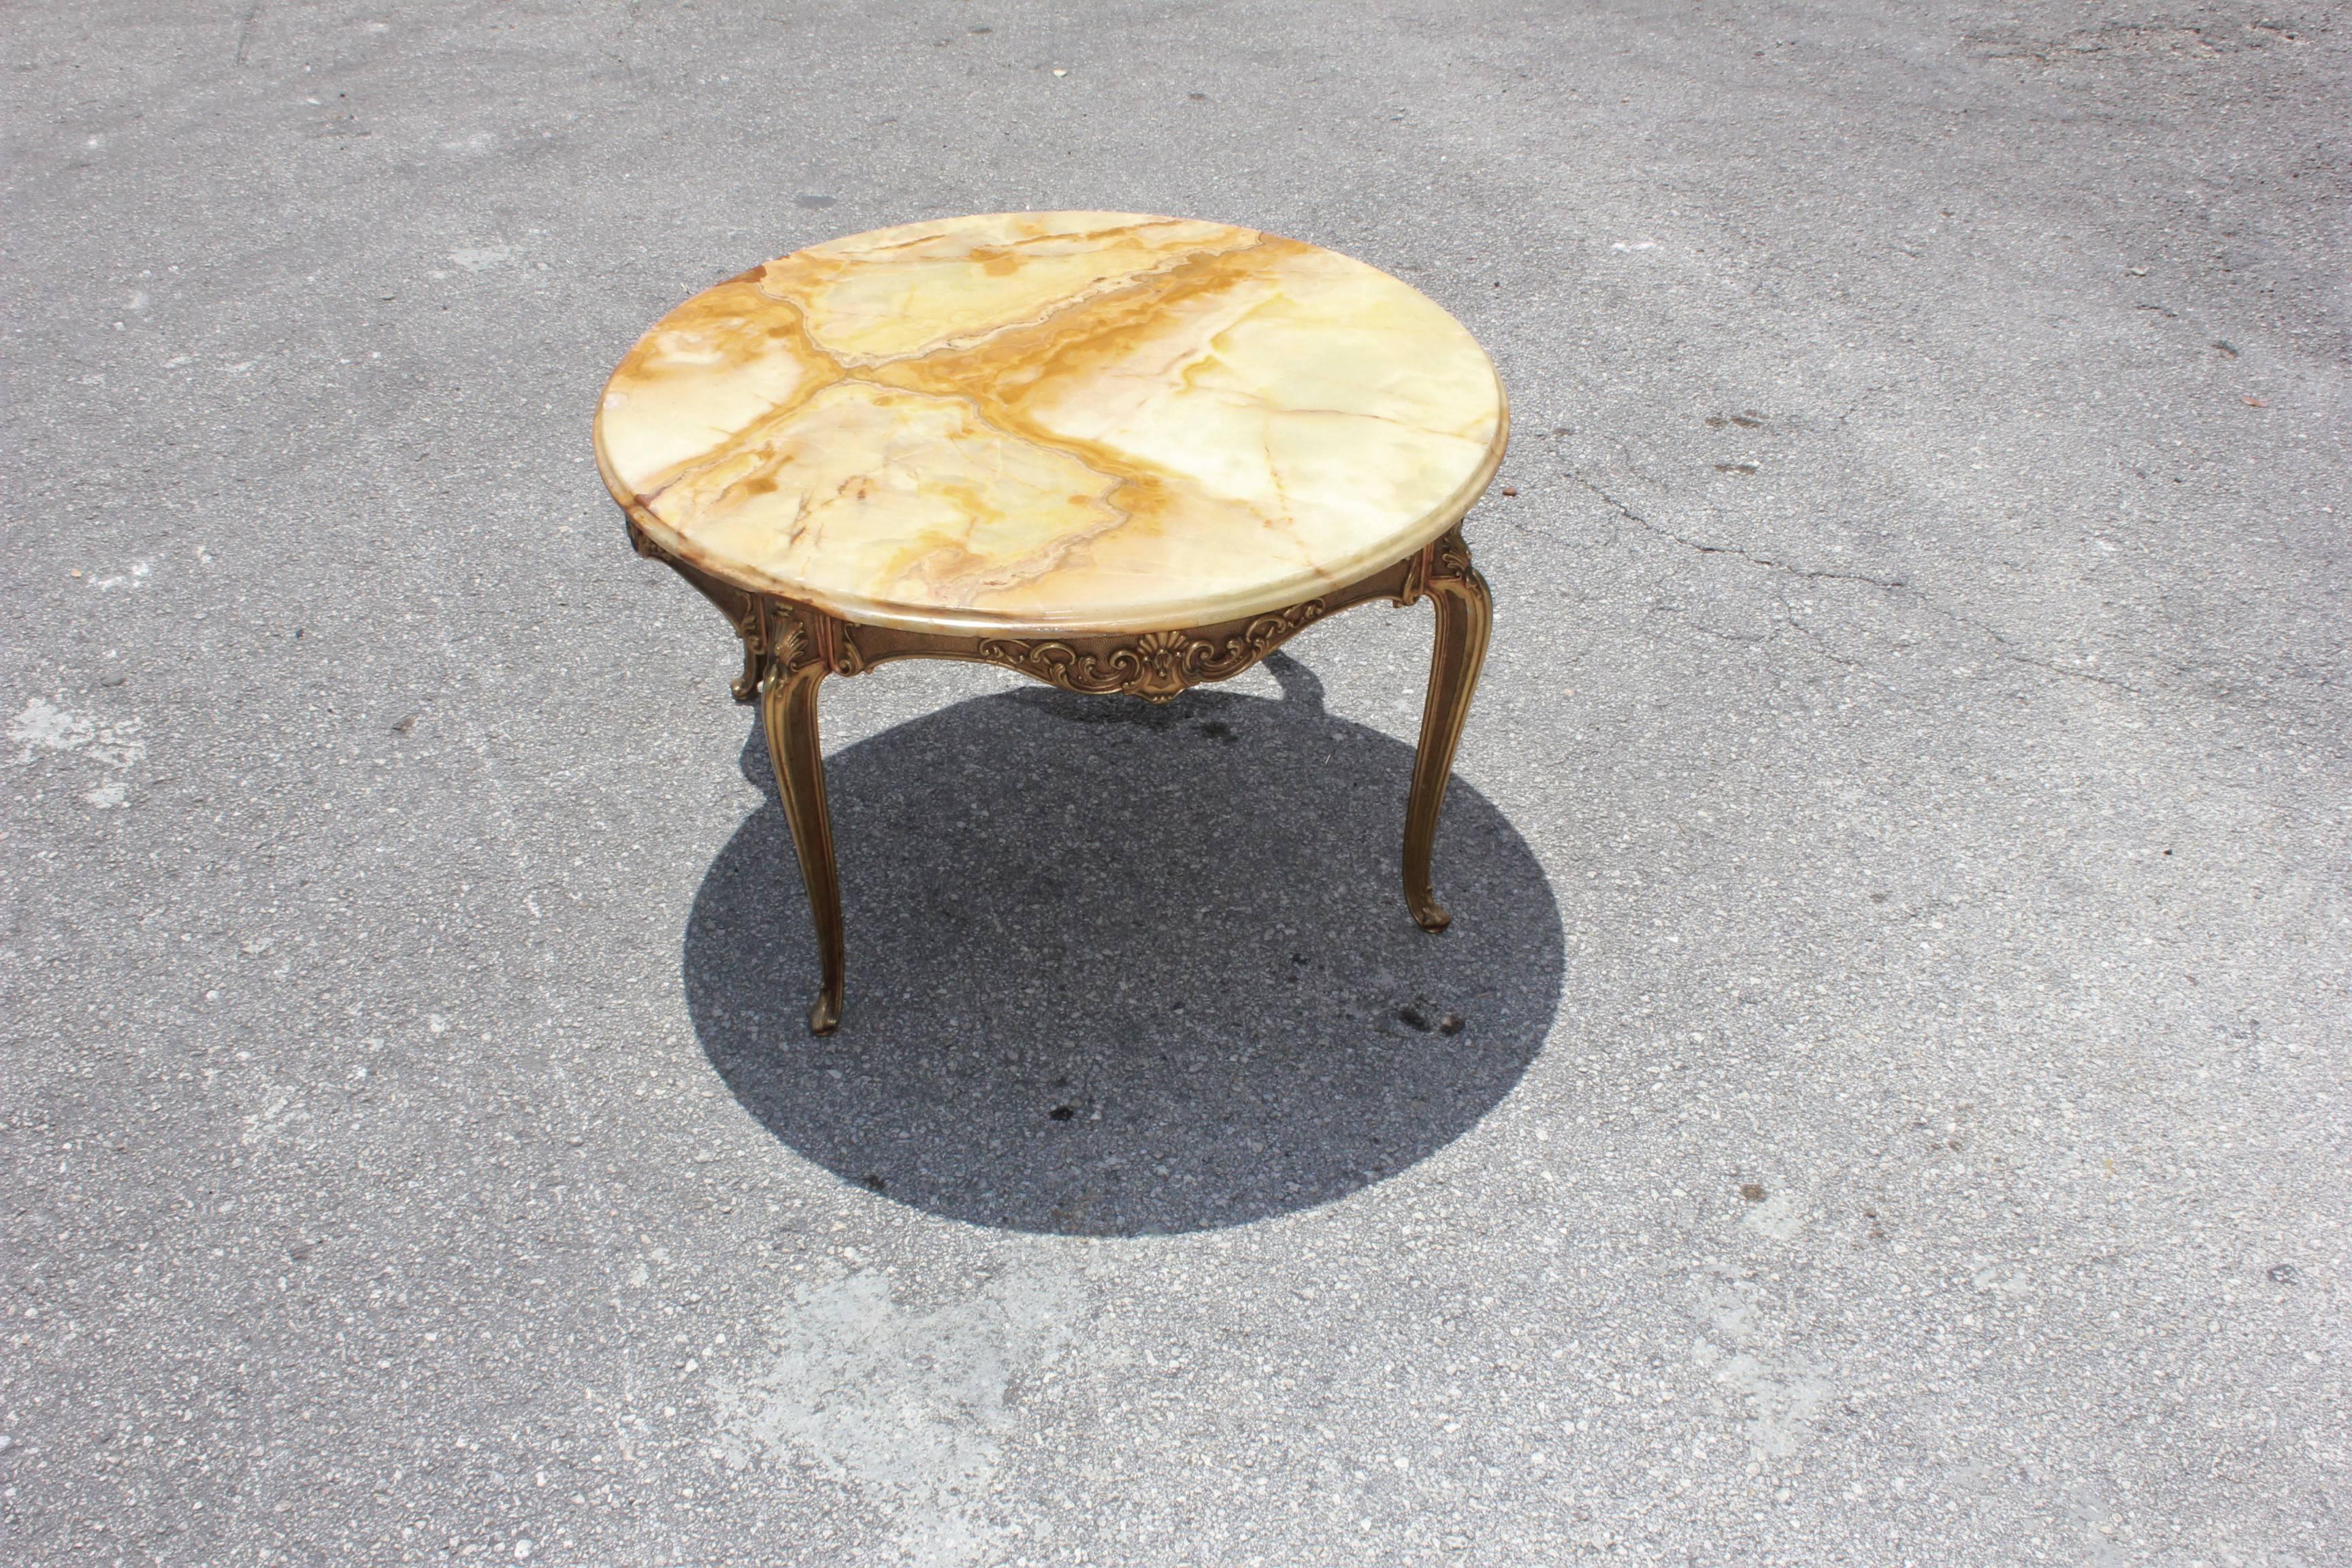 Classic French Maison Jansen round coffee or cocktail bronze table with onyx top circa 1940s, the onyx are in beautiful color green and brown with beige, the onyx and the bronze table are in perfect condition ,we traveled to buy all our pieces in